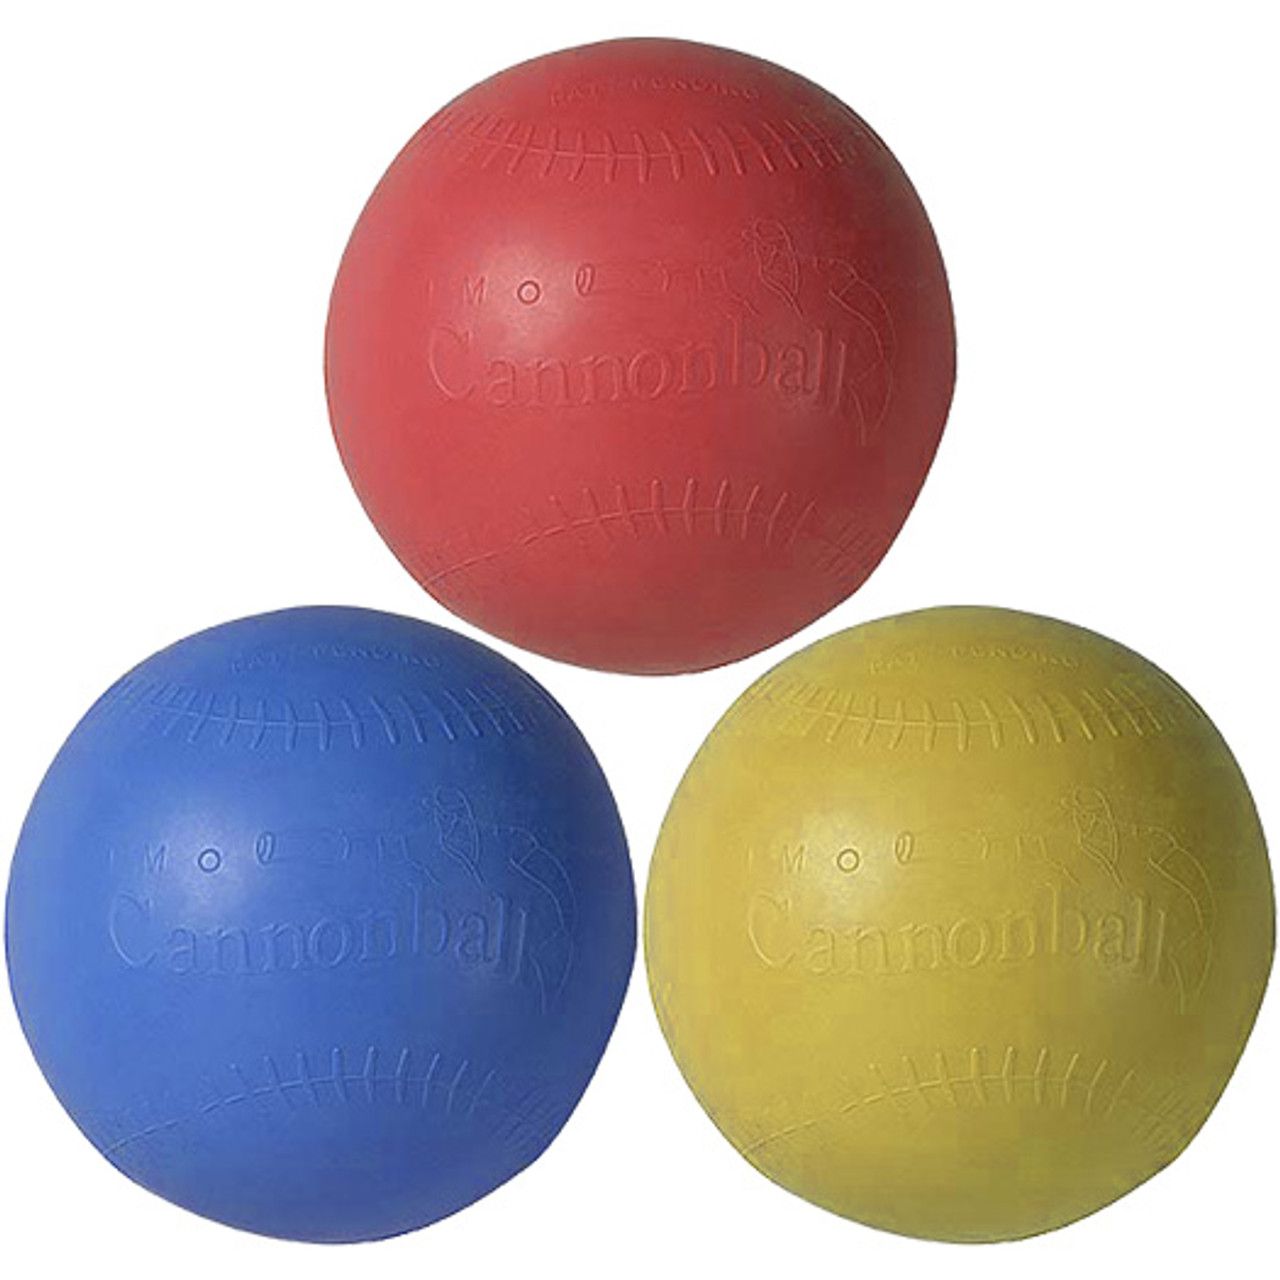 Snap Weights, Cannon Ball, Painted, (11) Versions, (4) Per Pack